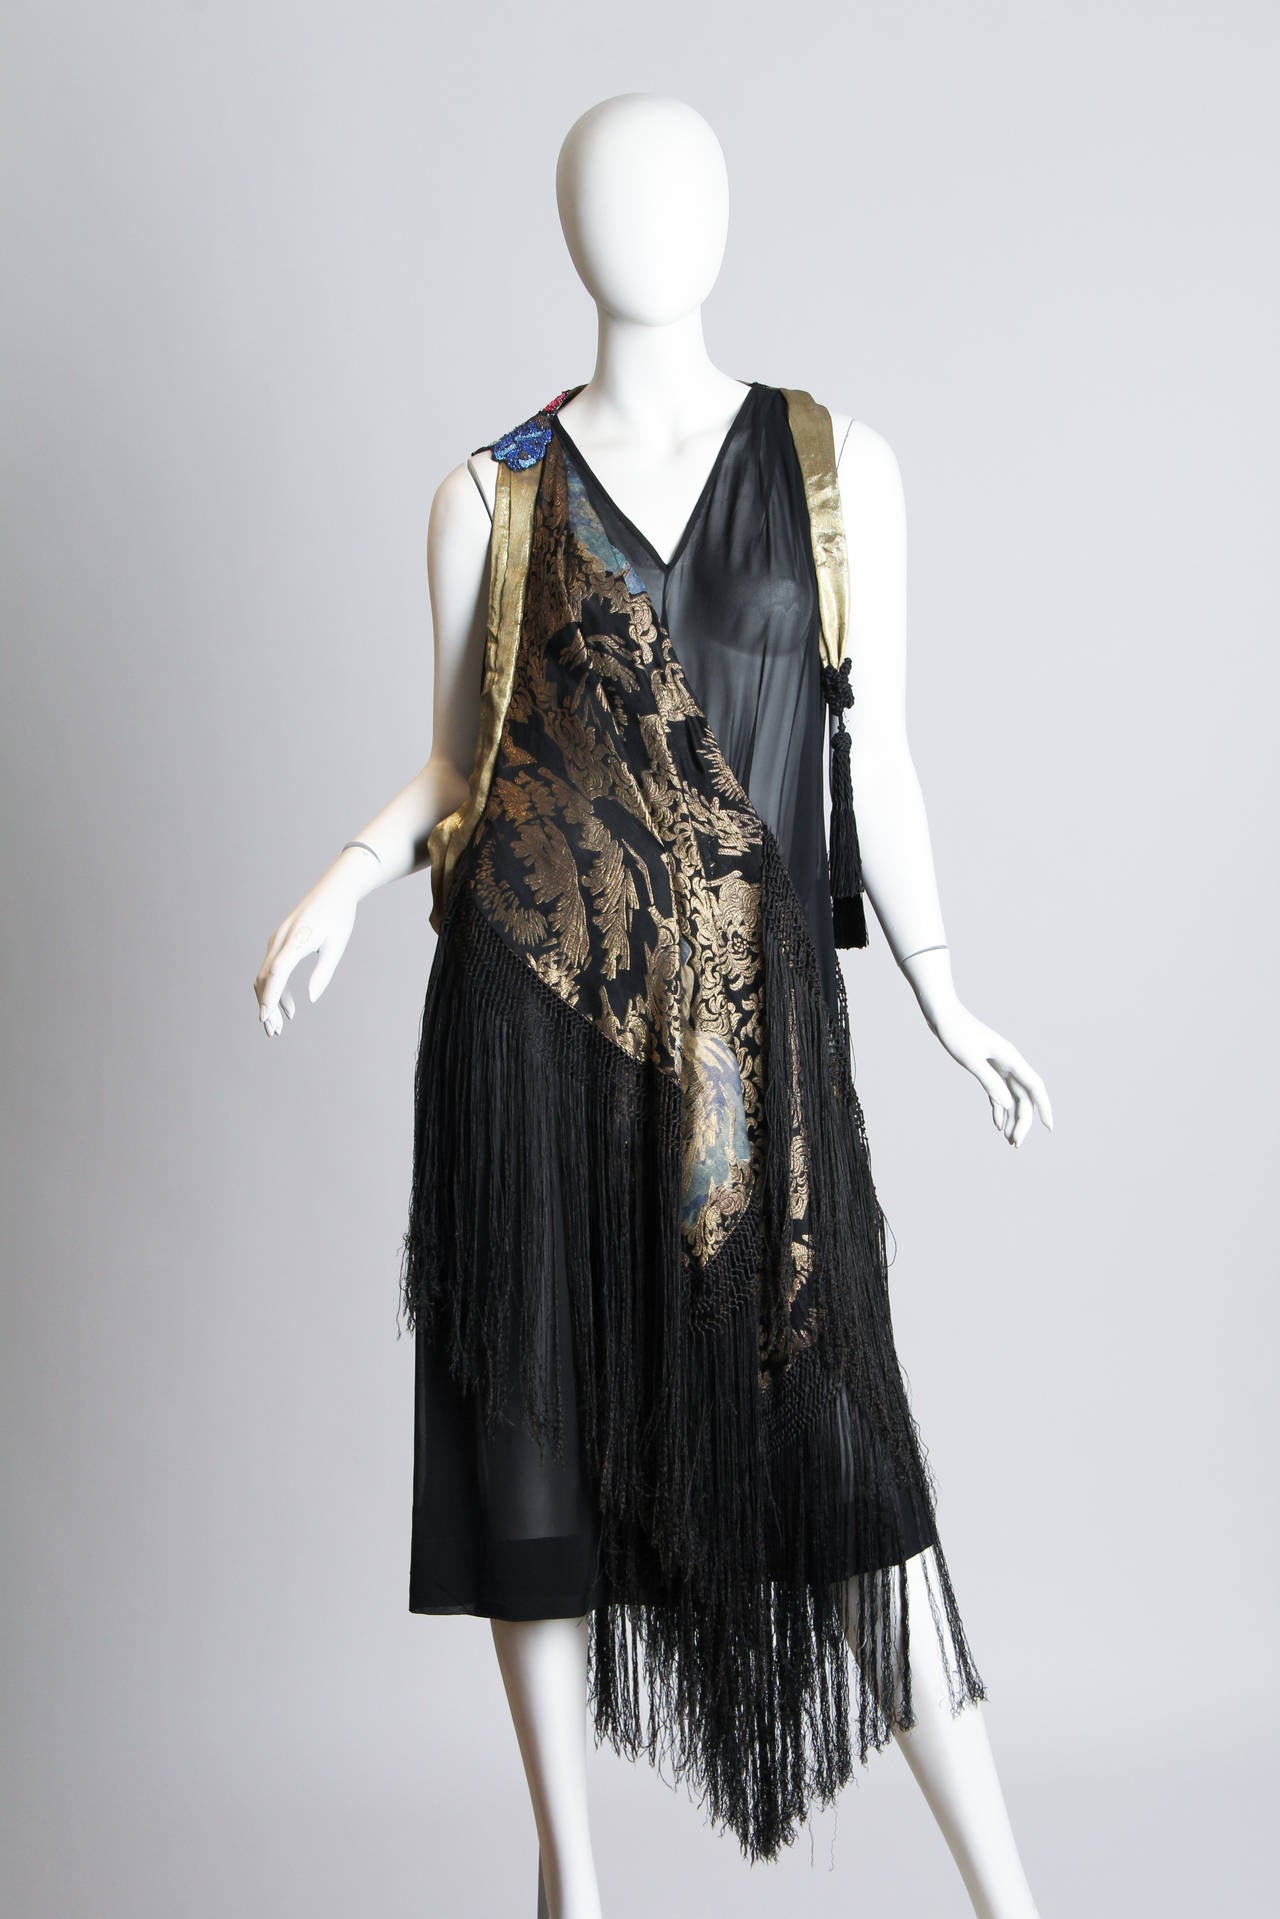 We do so much here with these antique shawls that we were happily pleased to see this original design from the 1920s. We've done some repairs and tightened up the seams and this dress is as ready to party as the day it was made. The dress is cut